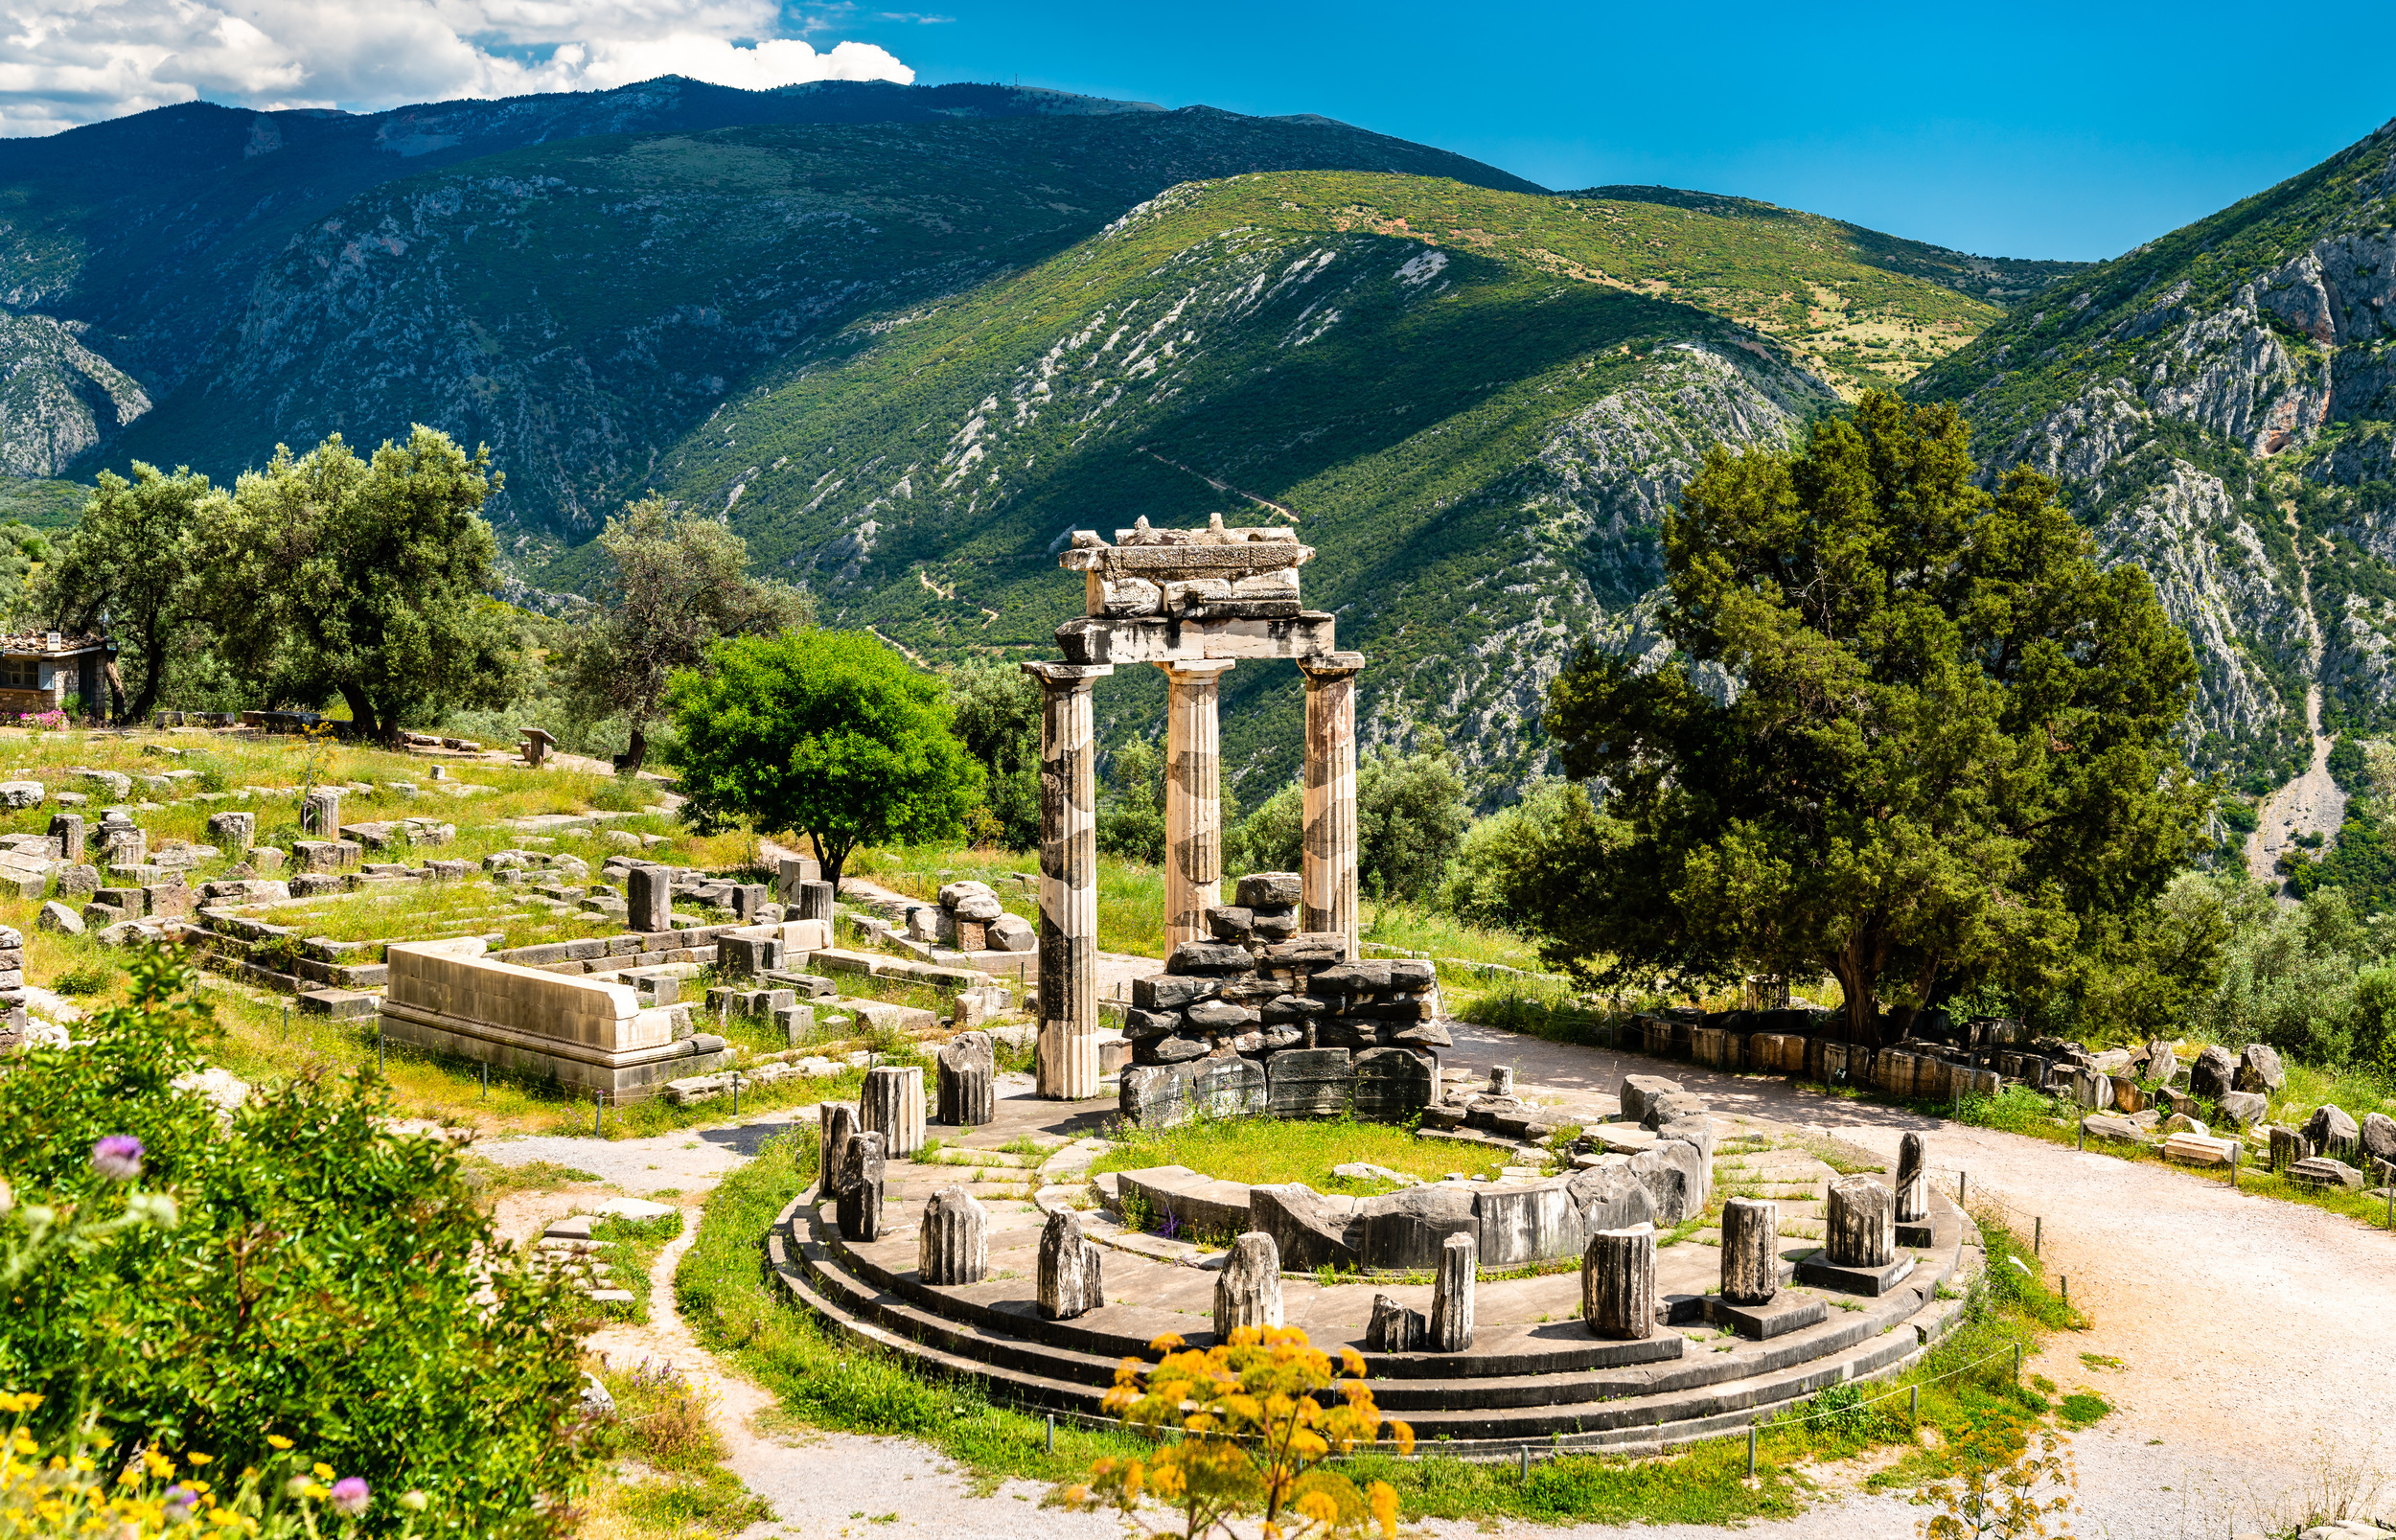 <p>One of the most popular (and easiest) day trips from Athens, Delphi is just a couple of hours by car or bus but feels a world away. The ride will take you through Greek farmland before entering the mountains just before entering the ancient city ruins. Make sure to plan for a full day here, or better yet, stay the night!</p><p>You may also like: <a href='https://www.yardbarker.com/lifestyle/articles/the_14_most_beautiful_beach_towns_on_the_west_coast/s1__38578337'>The 14 most beautiful beach towns on the West Coast</a></p>